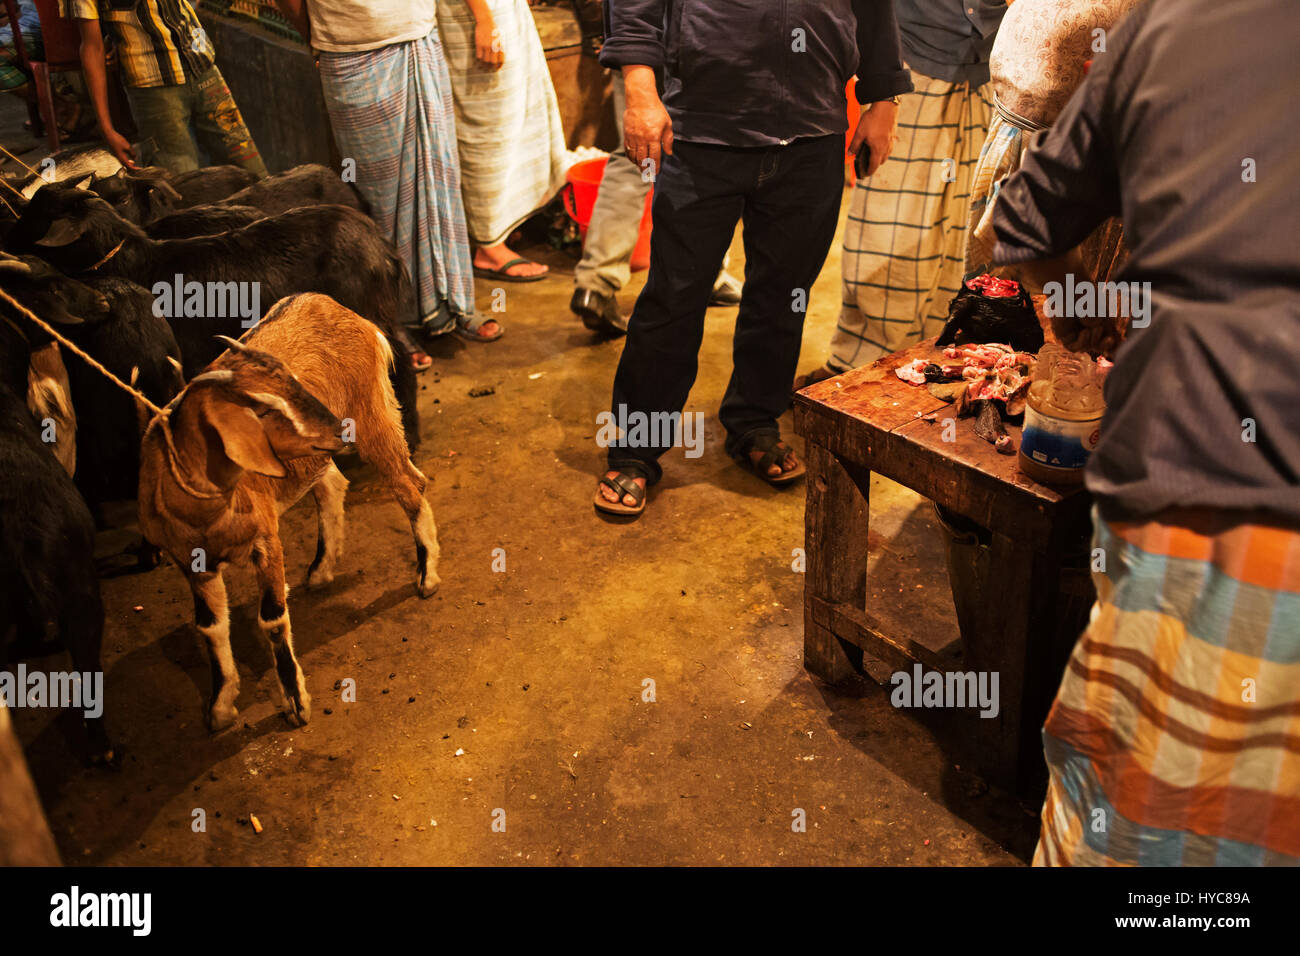 Goat market place, Dacca in Bangladesh Foto Stock